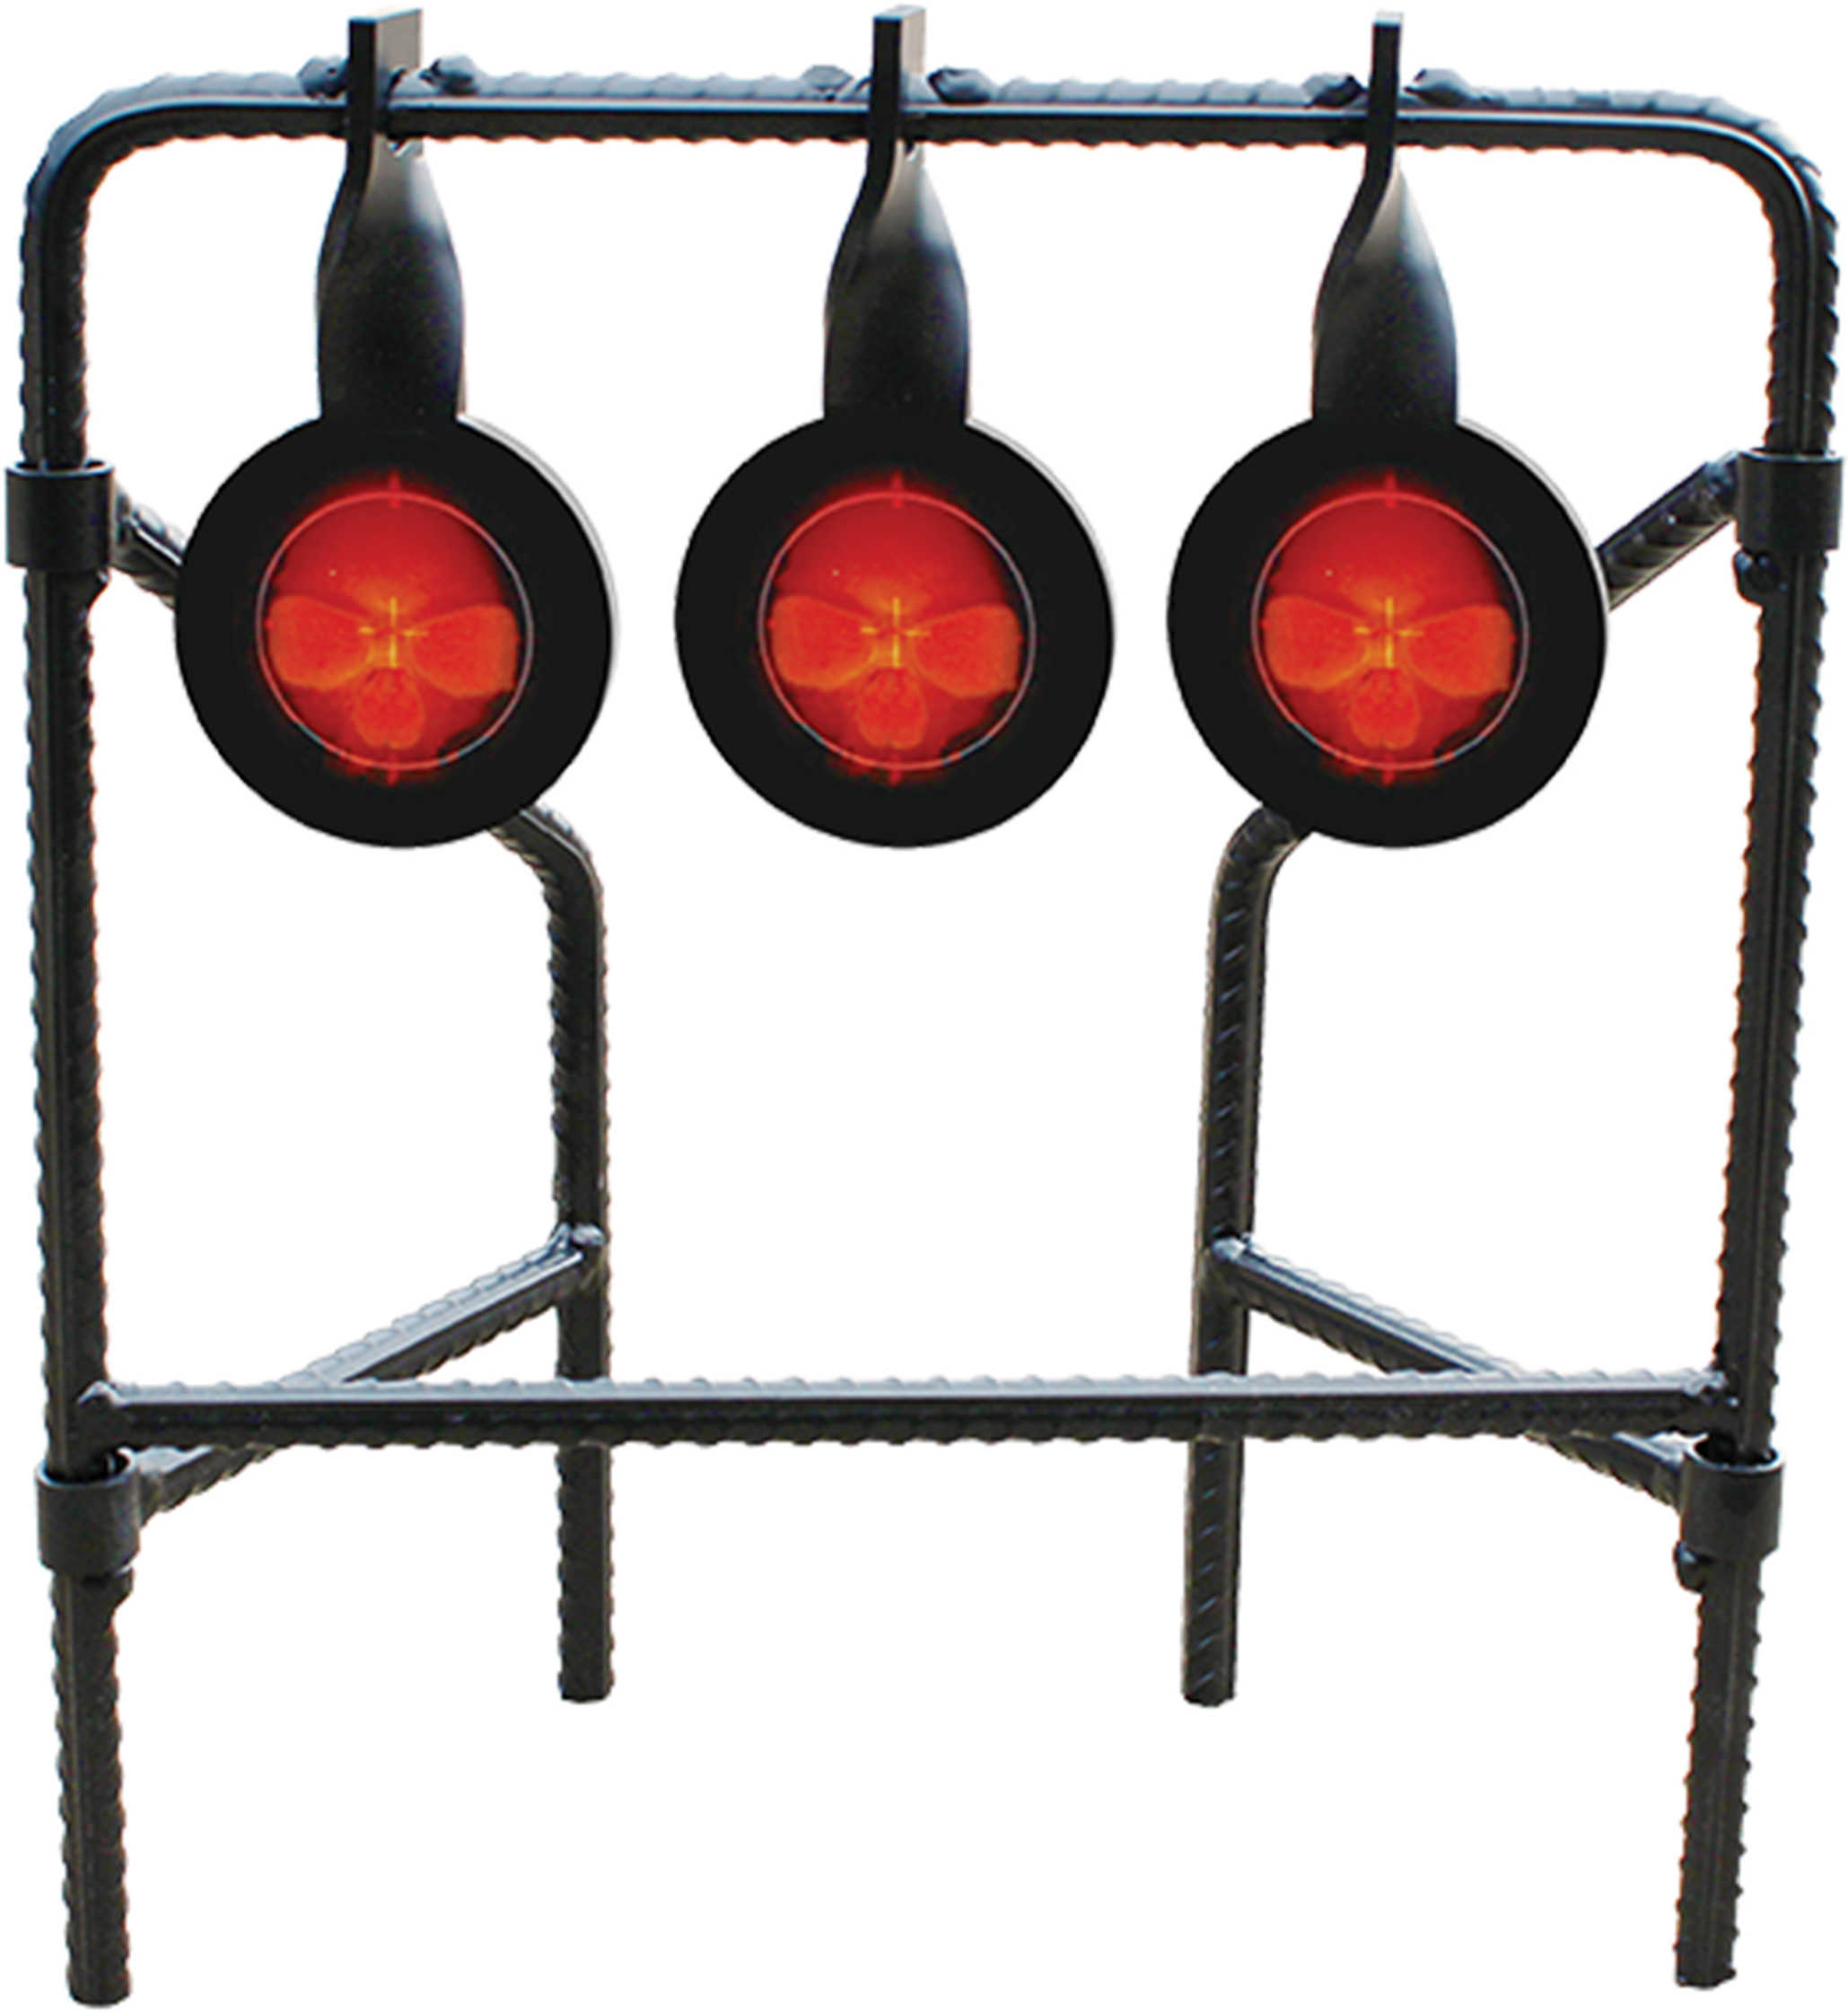 Do-All Traps Boxed Bonehead Rebar .22 Triple Spinner Target Md: BXBHTS